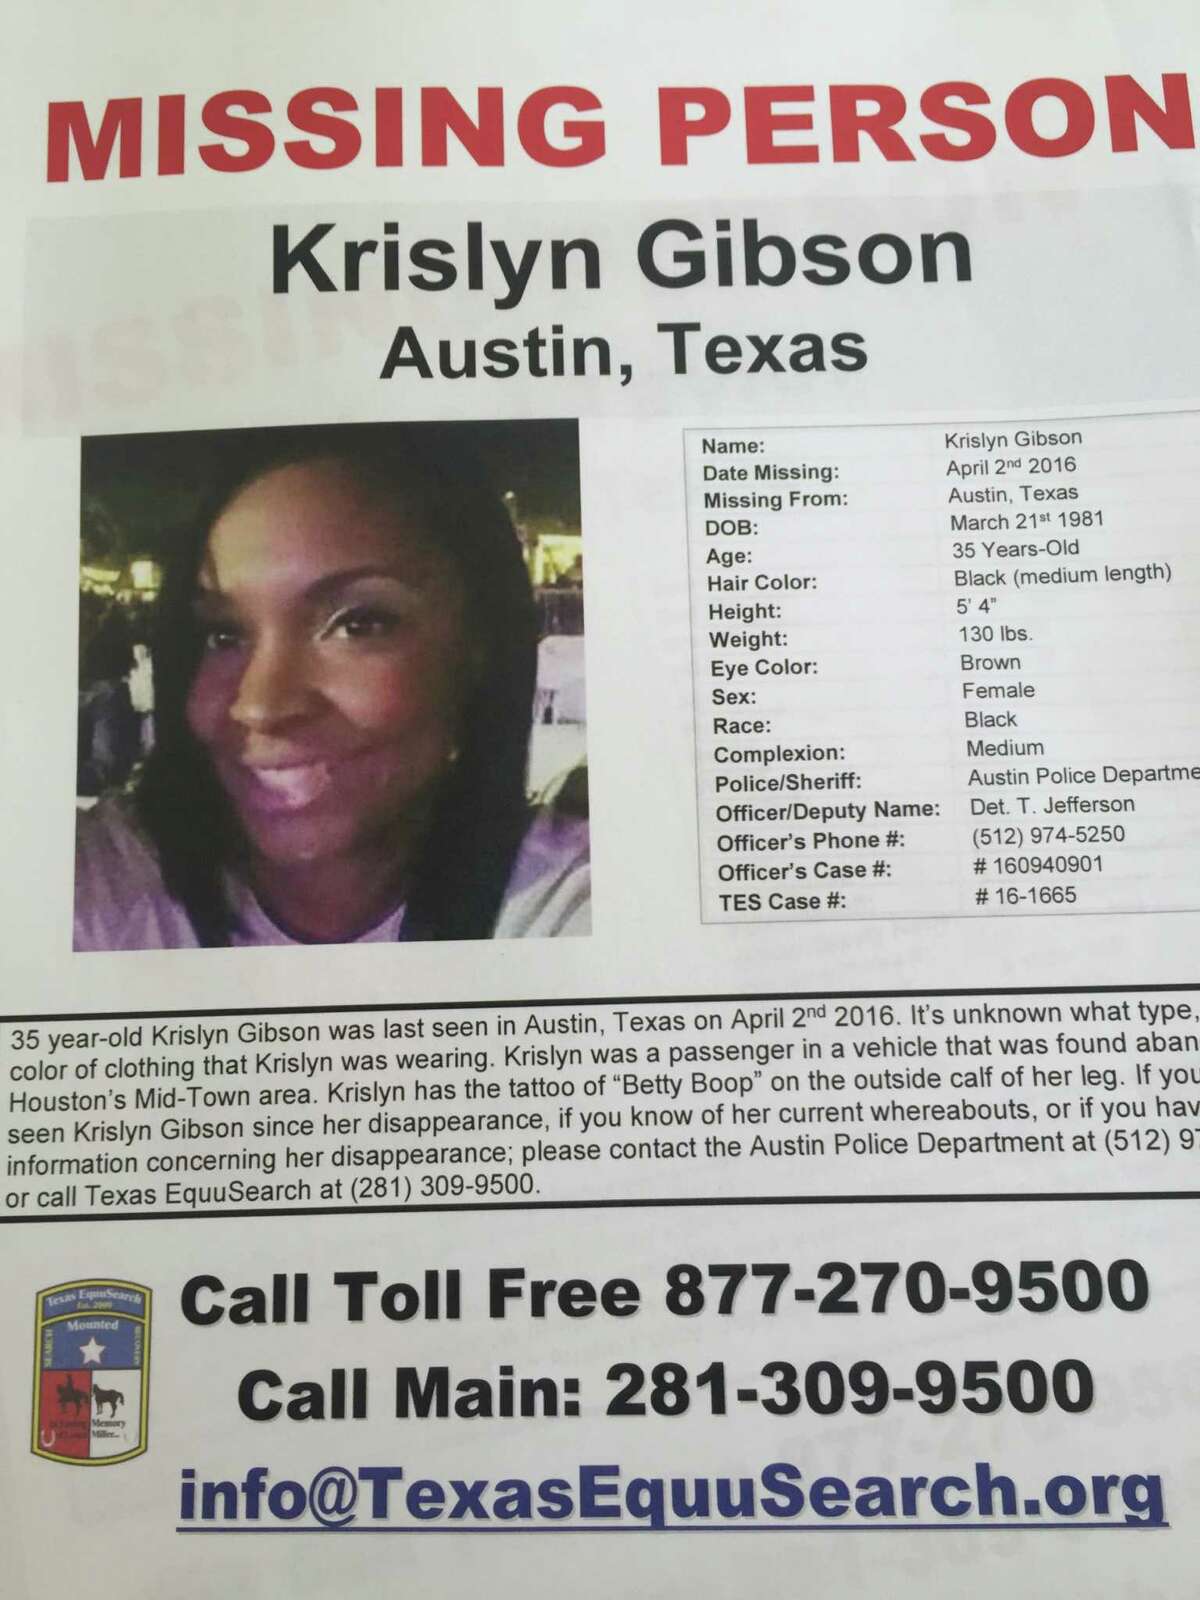 Photo 2 - Missing person photo from Krislyn Gibson, of the Houston area, who was last seen in Austin the weekend of April 1 with her long-time friend, Sidney Taylor. She works for ExxonMobil and is a single mother with an 8-year-old son. (Photo by Dane Schiller)